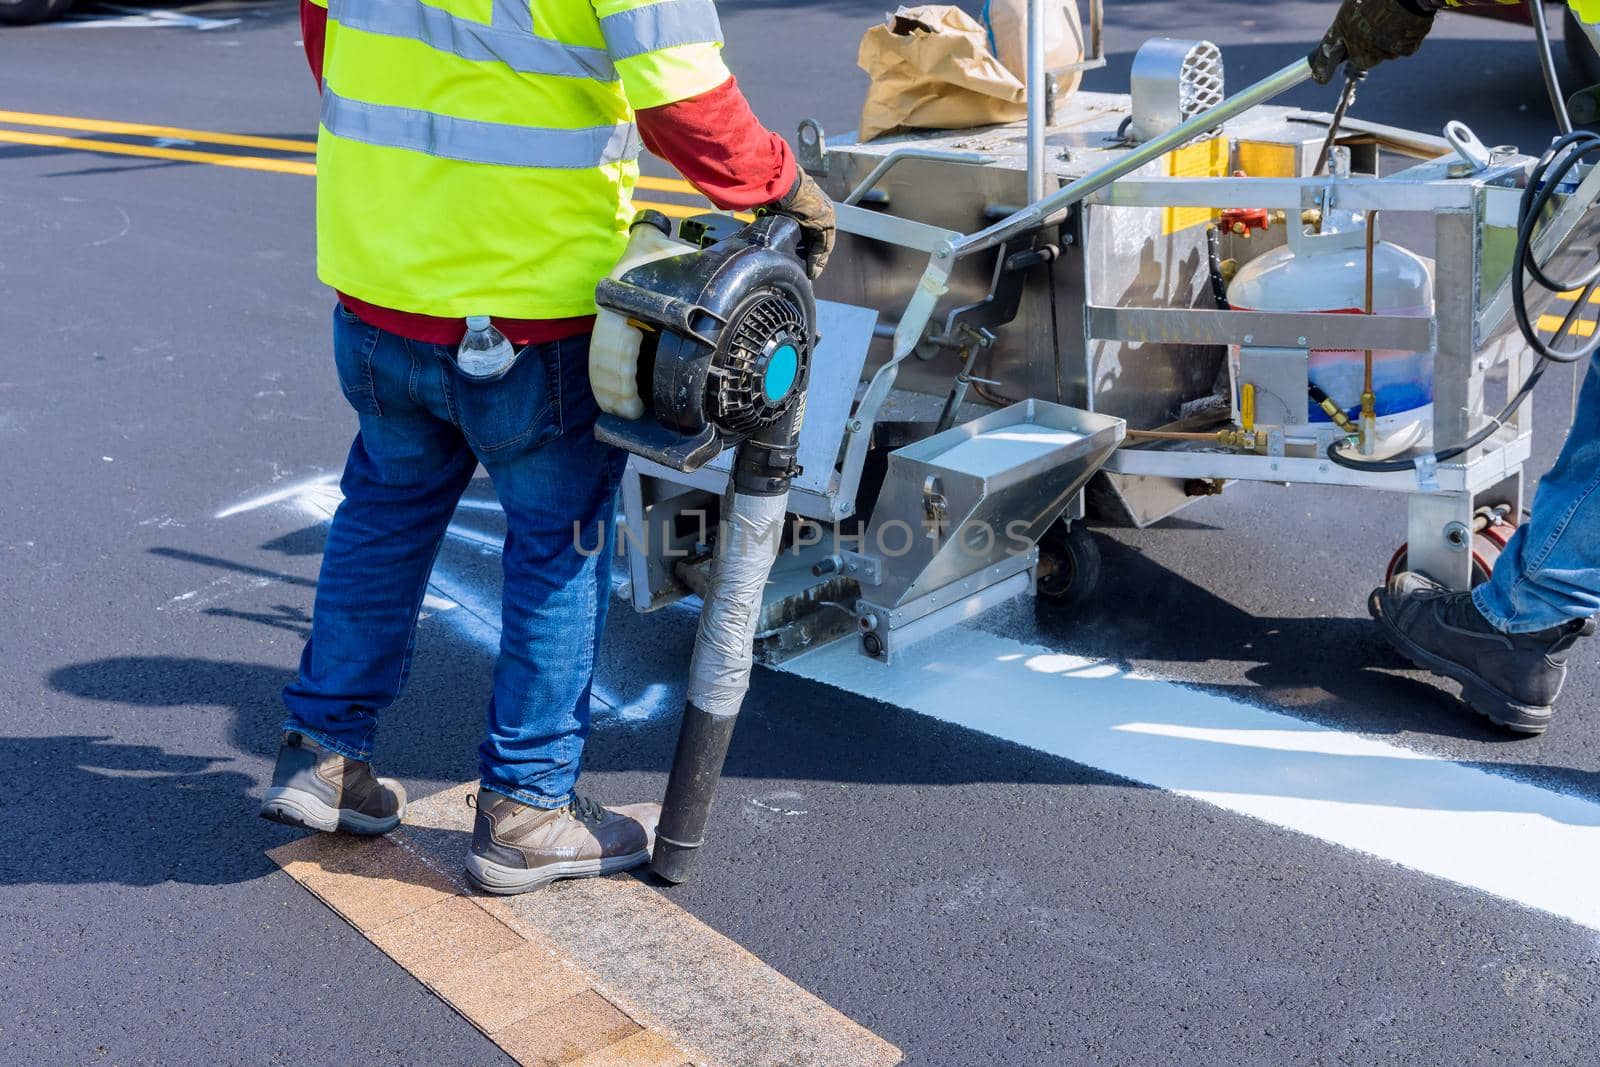 Road worker painting white line on the street surface tor thermoplastic spray marking machine during road construction by ungvar